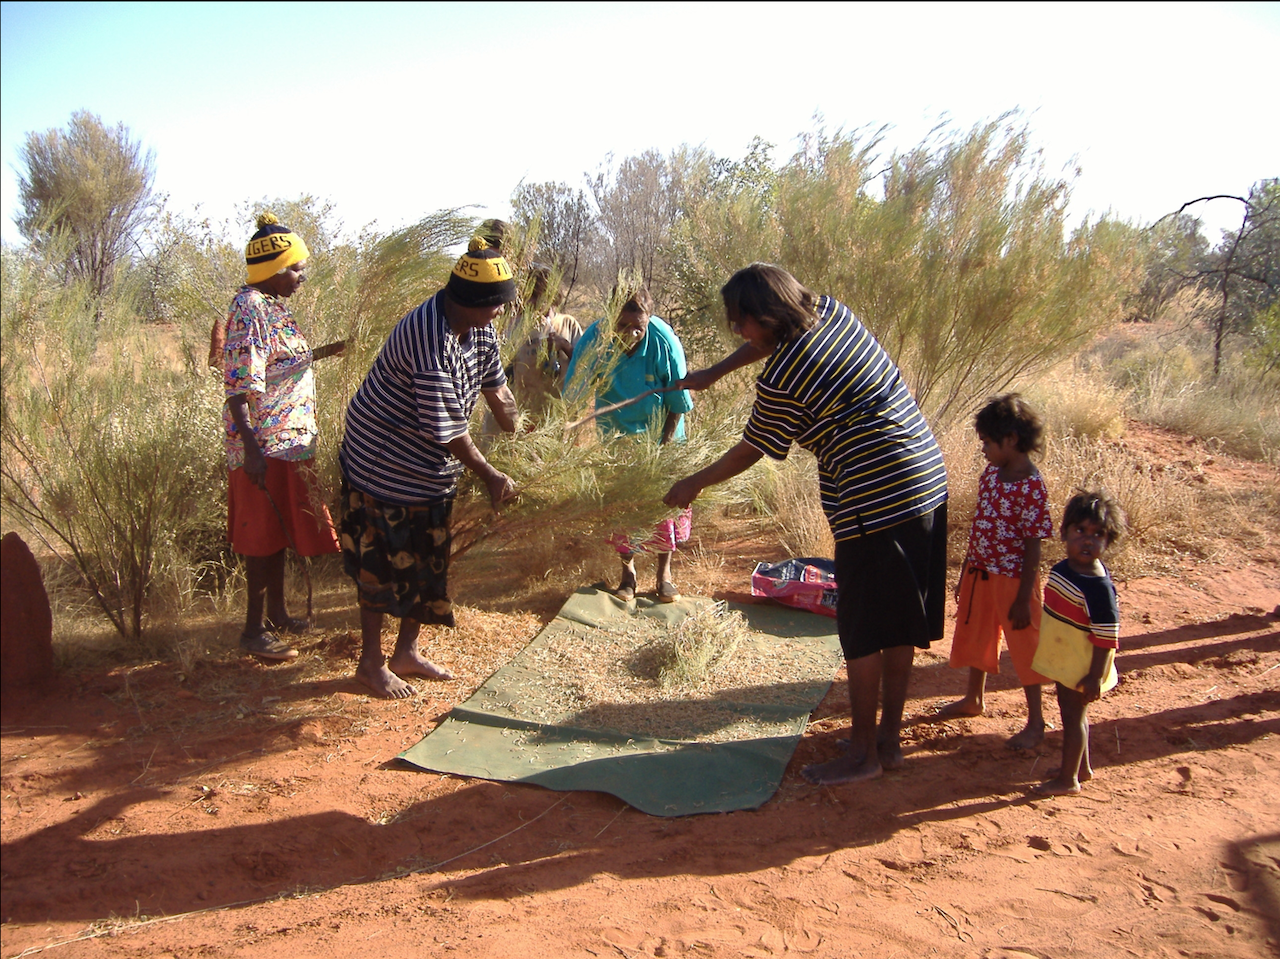 Women from Ampilawatja harvest Ilkerte for sale. At CSIRO Fiona and Josie Douglas researched and documented small-scale commercial trade 2005 - 2009.